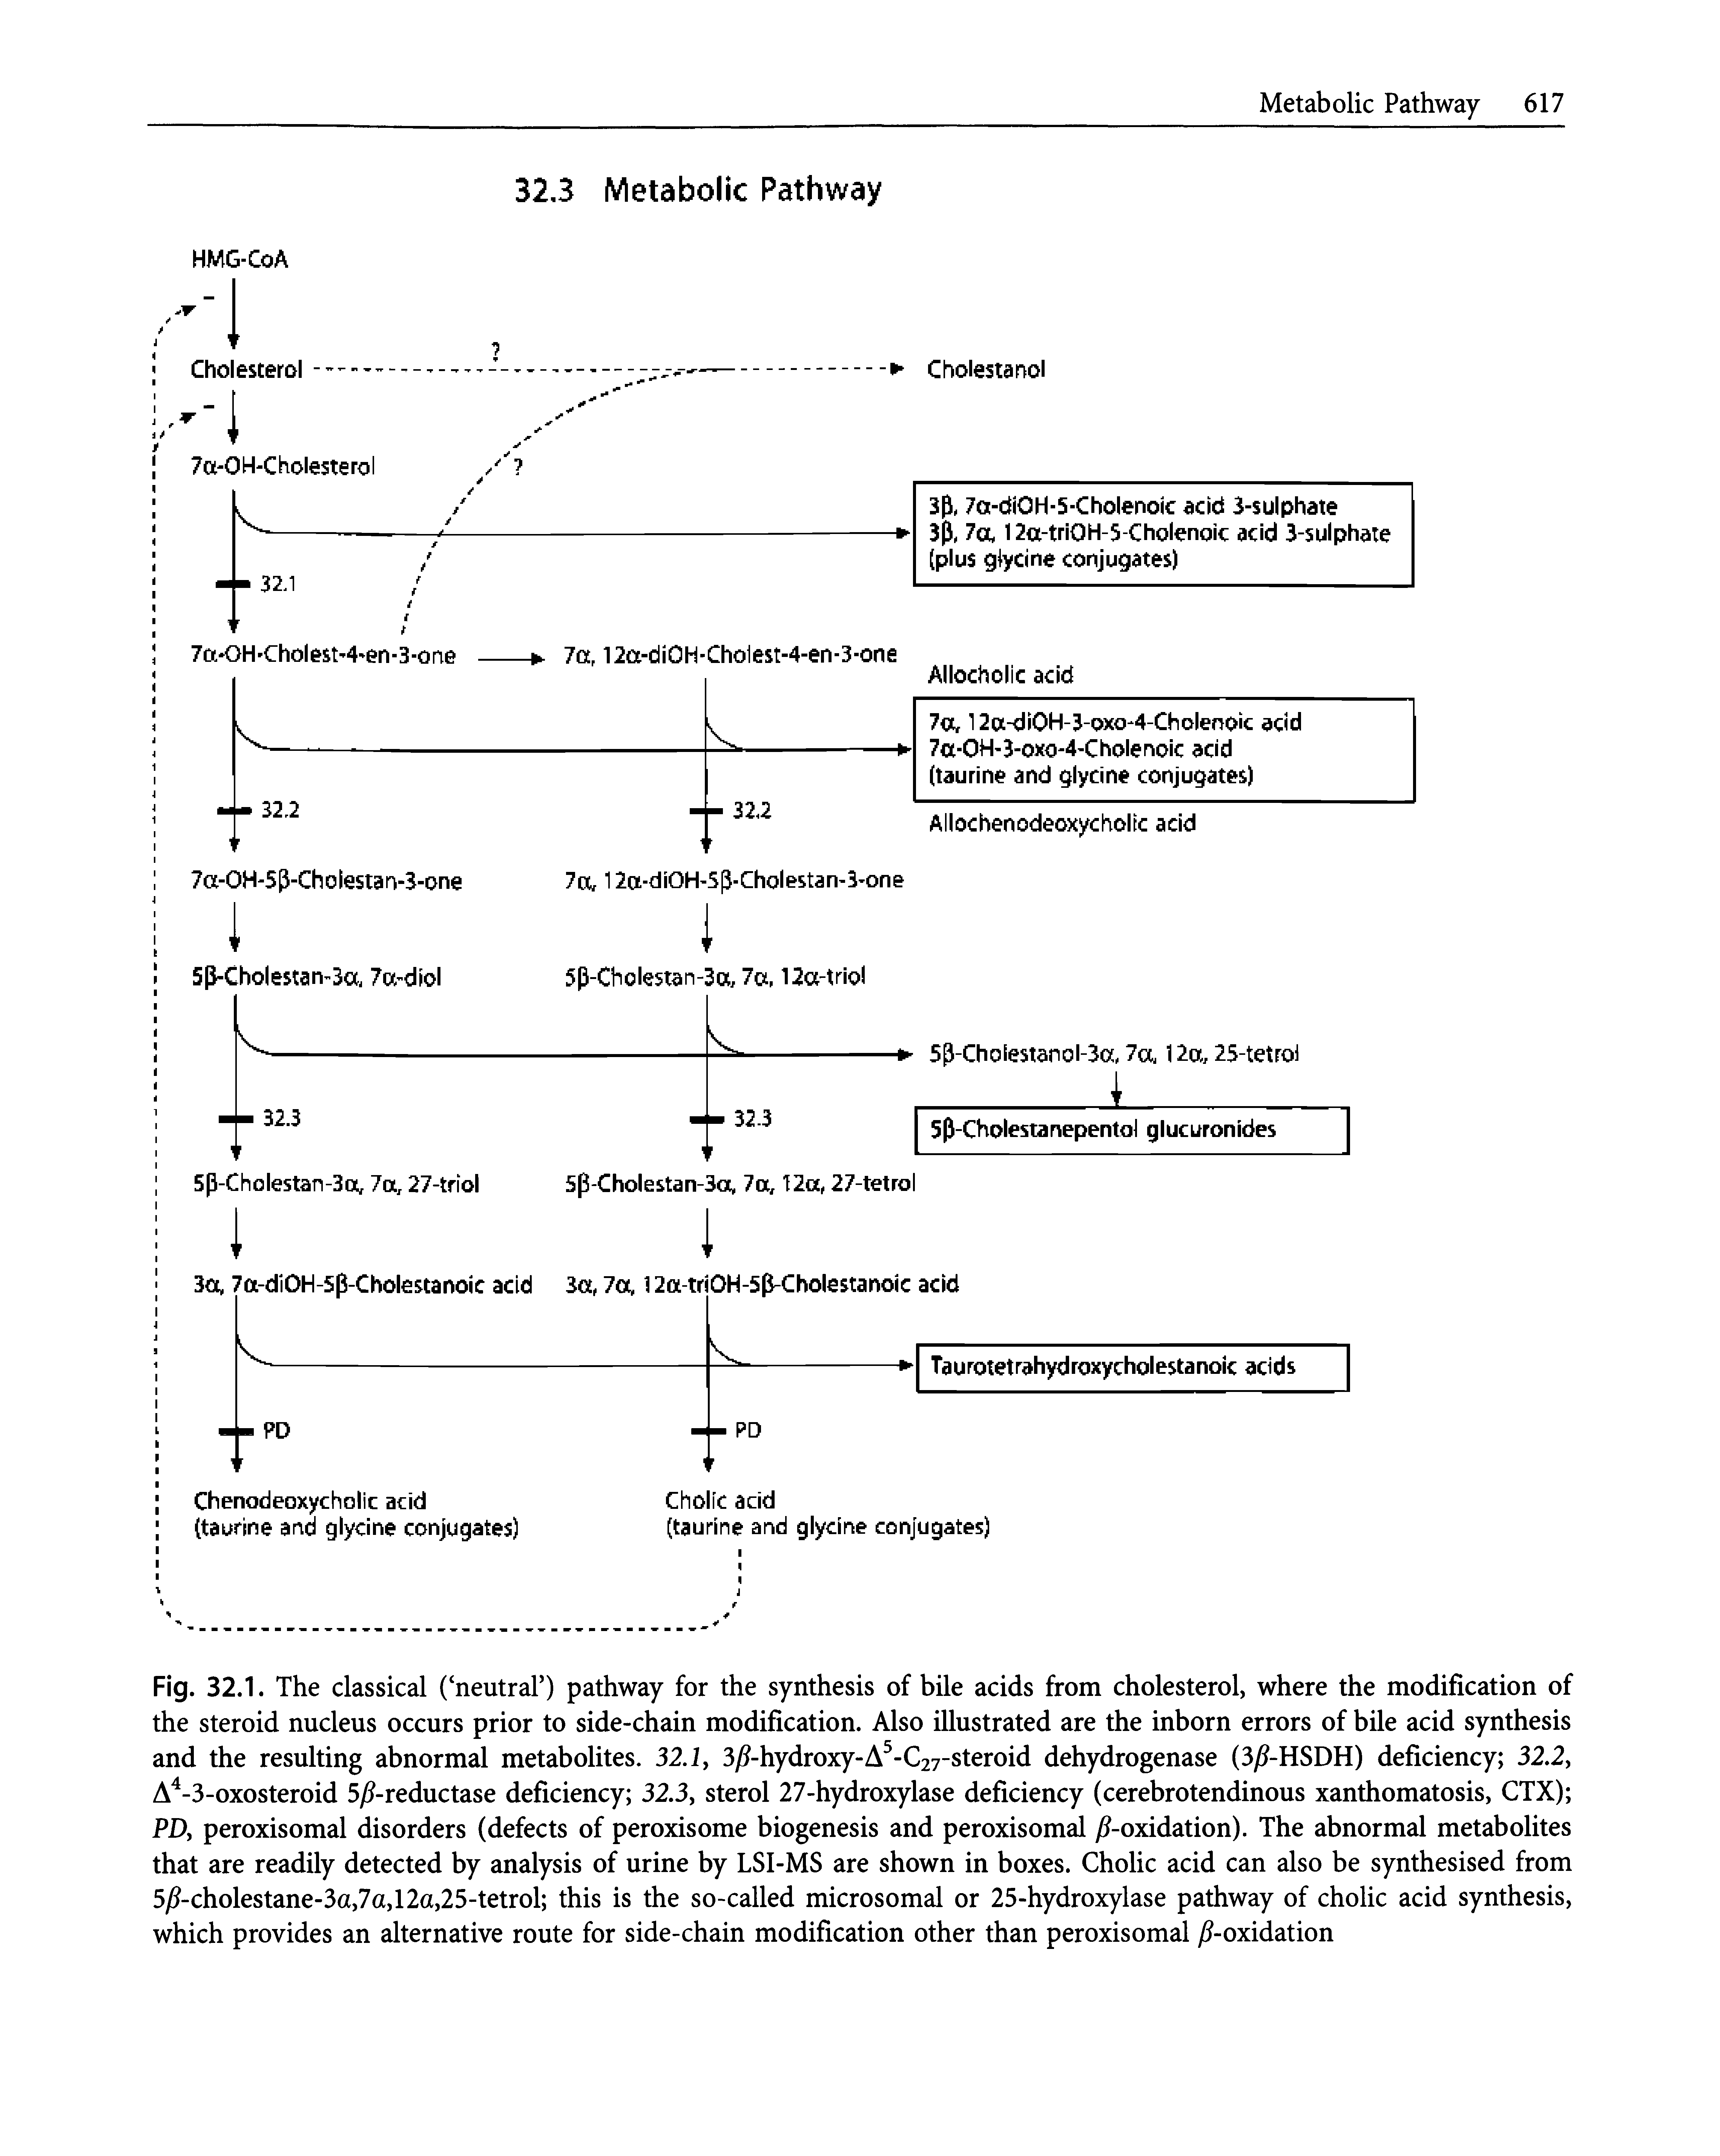 Fig. 32.1. The classical ( neutral ) pathway for the synthesis of bile acids from cholesterol, where the modification of the steroid nucleus occurs prior to side-chain modification. Also illustrated are the inborn errors of bile acid synthesis and the resulting abnormal metabolites. 32.1, 3) -hydroxy-A -C27-steroid dehydrogenase (3) -HSDH) deficiency 32.2, A -3-oxosteroid 5 -reductase deficiency 32.3, sterol 27-hydroxylase deficiency (cerebrotendinous xanthomatosis, CTX) PD, peroxisomal disorders (defects of peroxisome biogenesis and peroxisomal j -oxidation). The abnormal metabolites that are readily detected by analysis of urine by LSI-MS are shown in boxes. Cholic acid can also be synthesised from 5 -cholestane-3a,7a,12a,25-tetrol this is the so-called microsomal or 25-hydroxylase pathway of cholic acid synthesis, which provides an alternative route for side-chain modification other than peroxisomal j -oxidation...